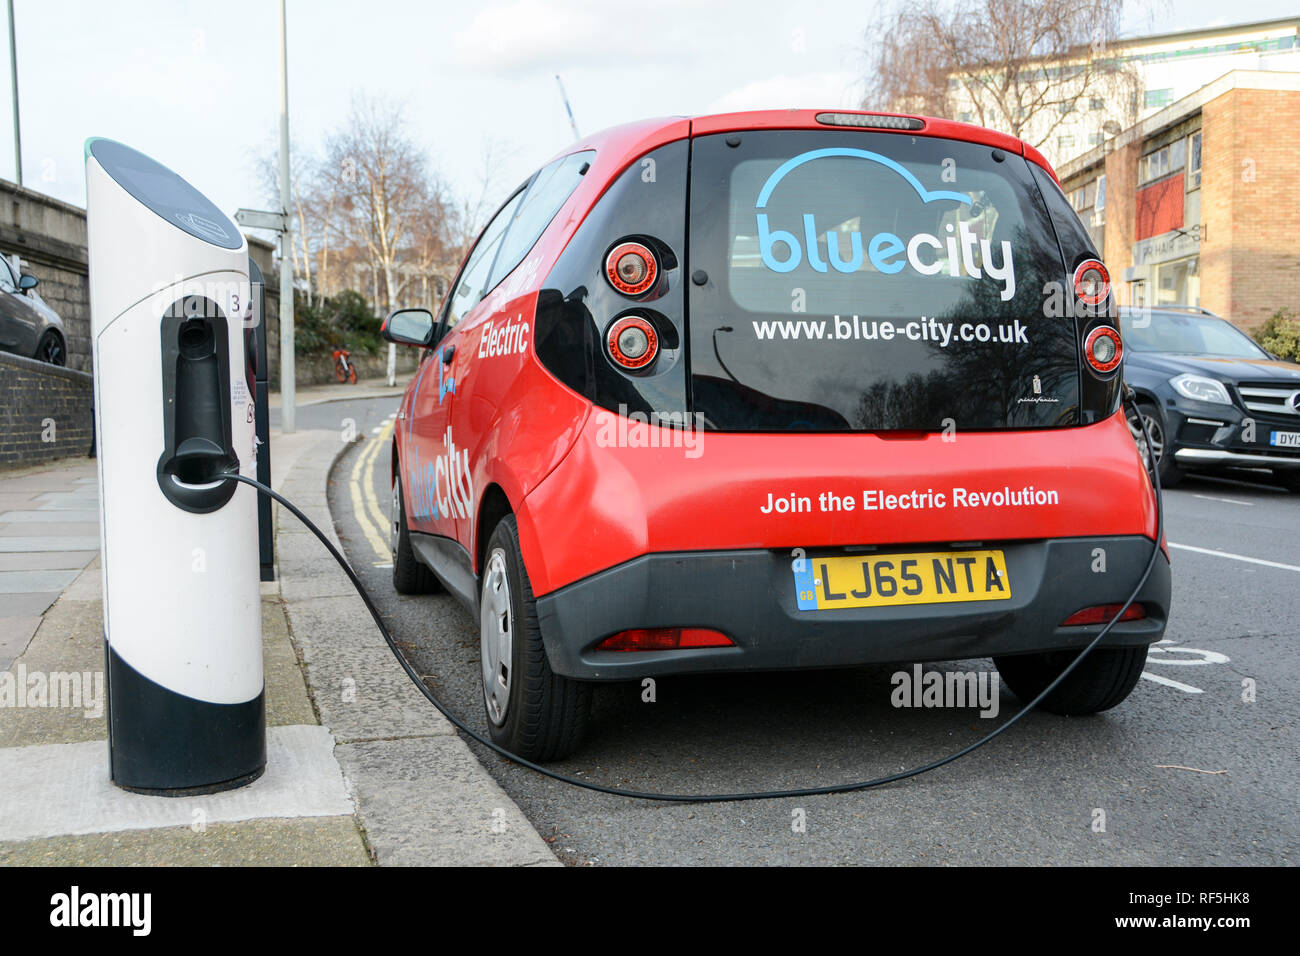 Blue City electric car-sharing scheme in London, UK Stock Photo